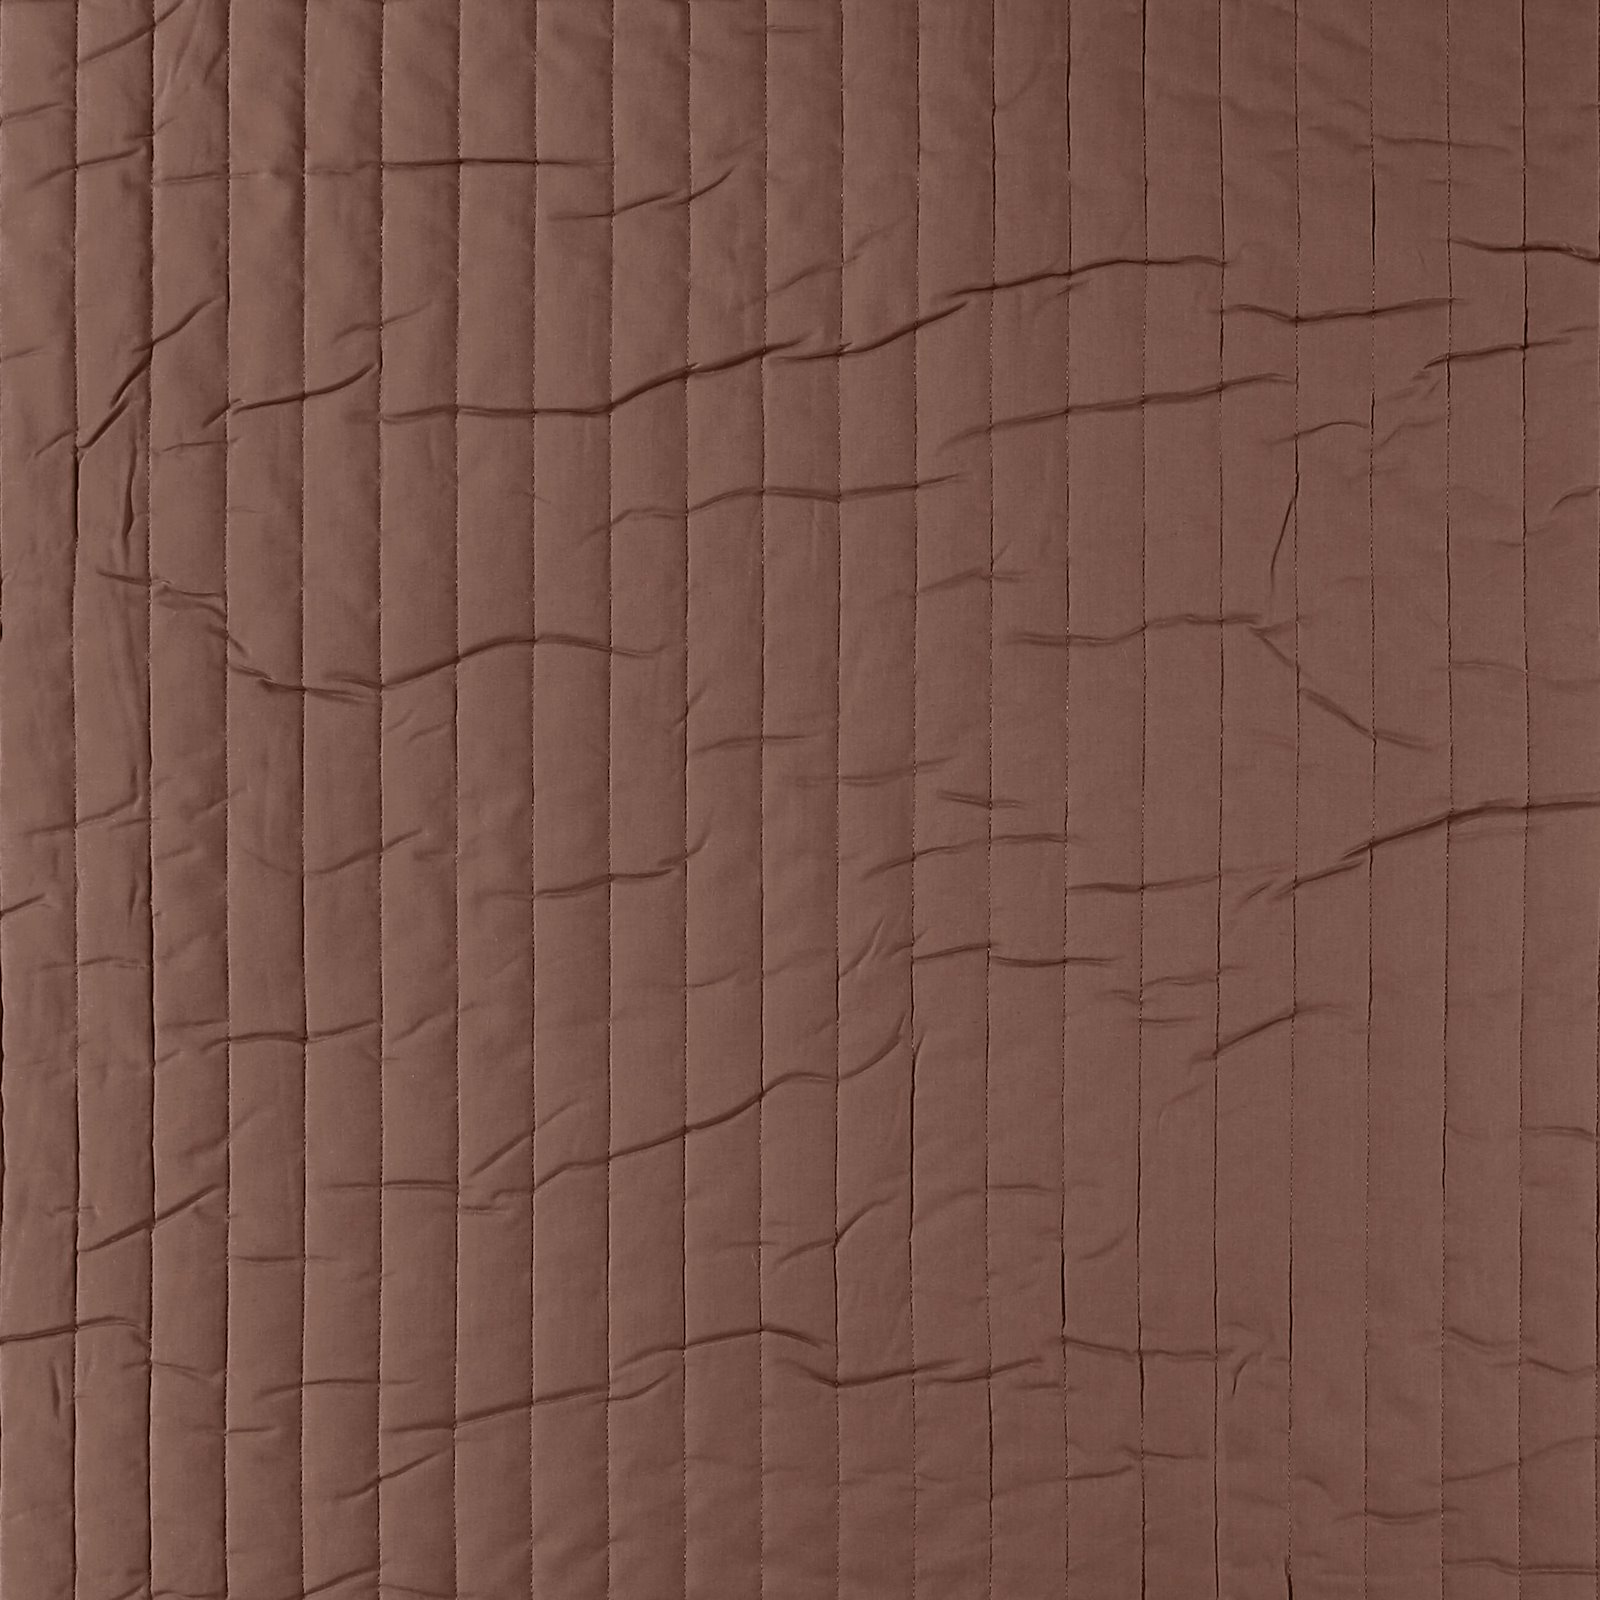 Woven quilt 2-side chestnut/terracotta 920257_pack_solid